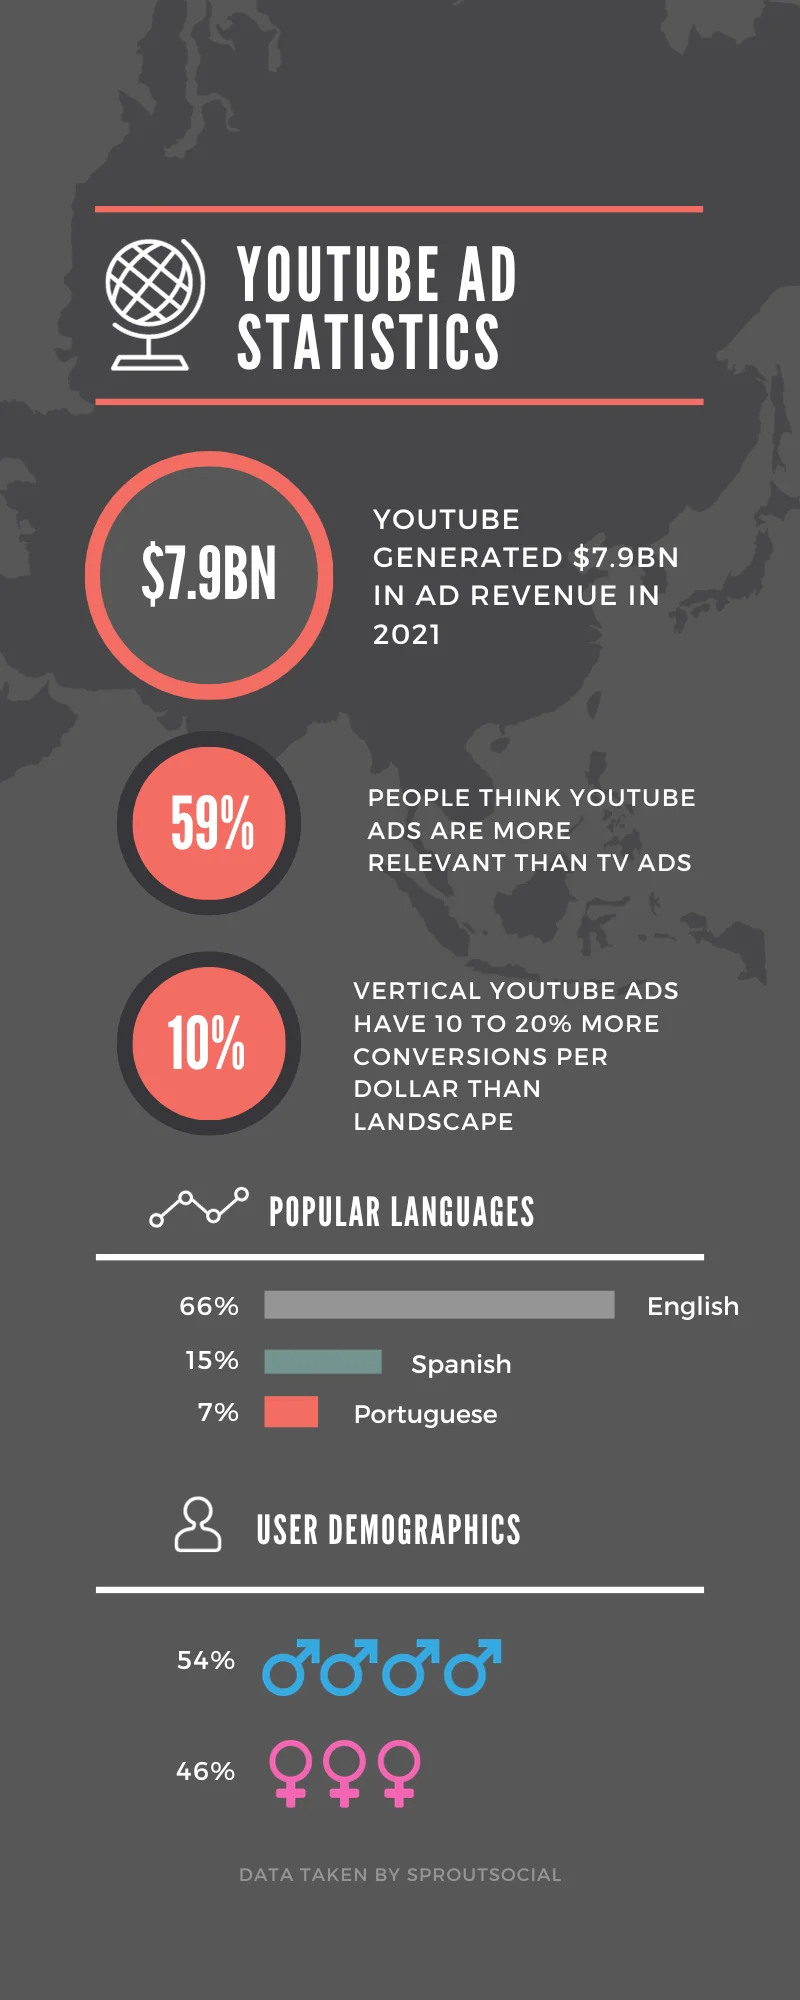 An infographic on youtube ad statistics